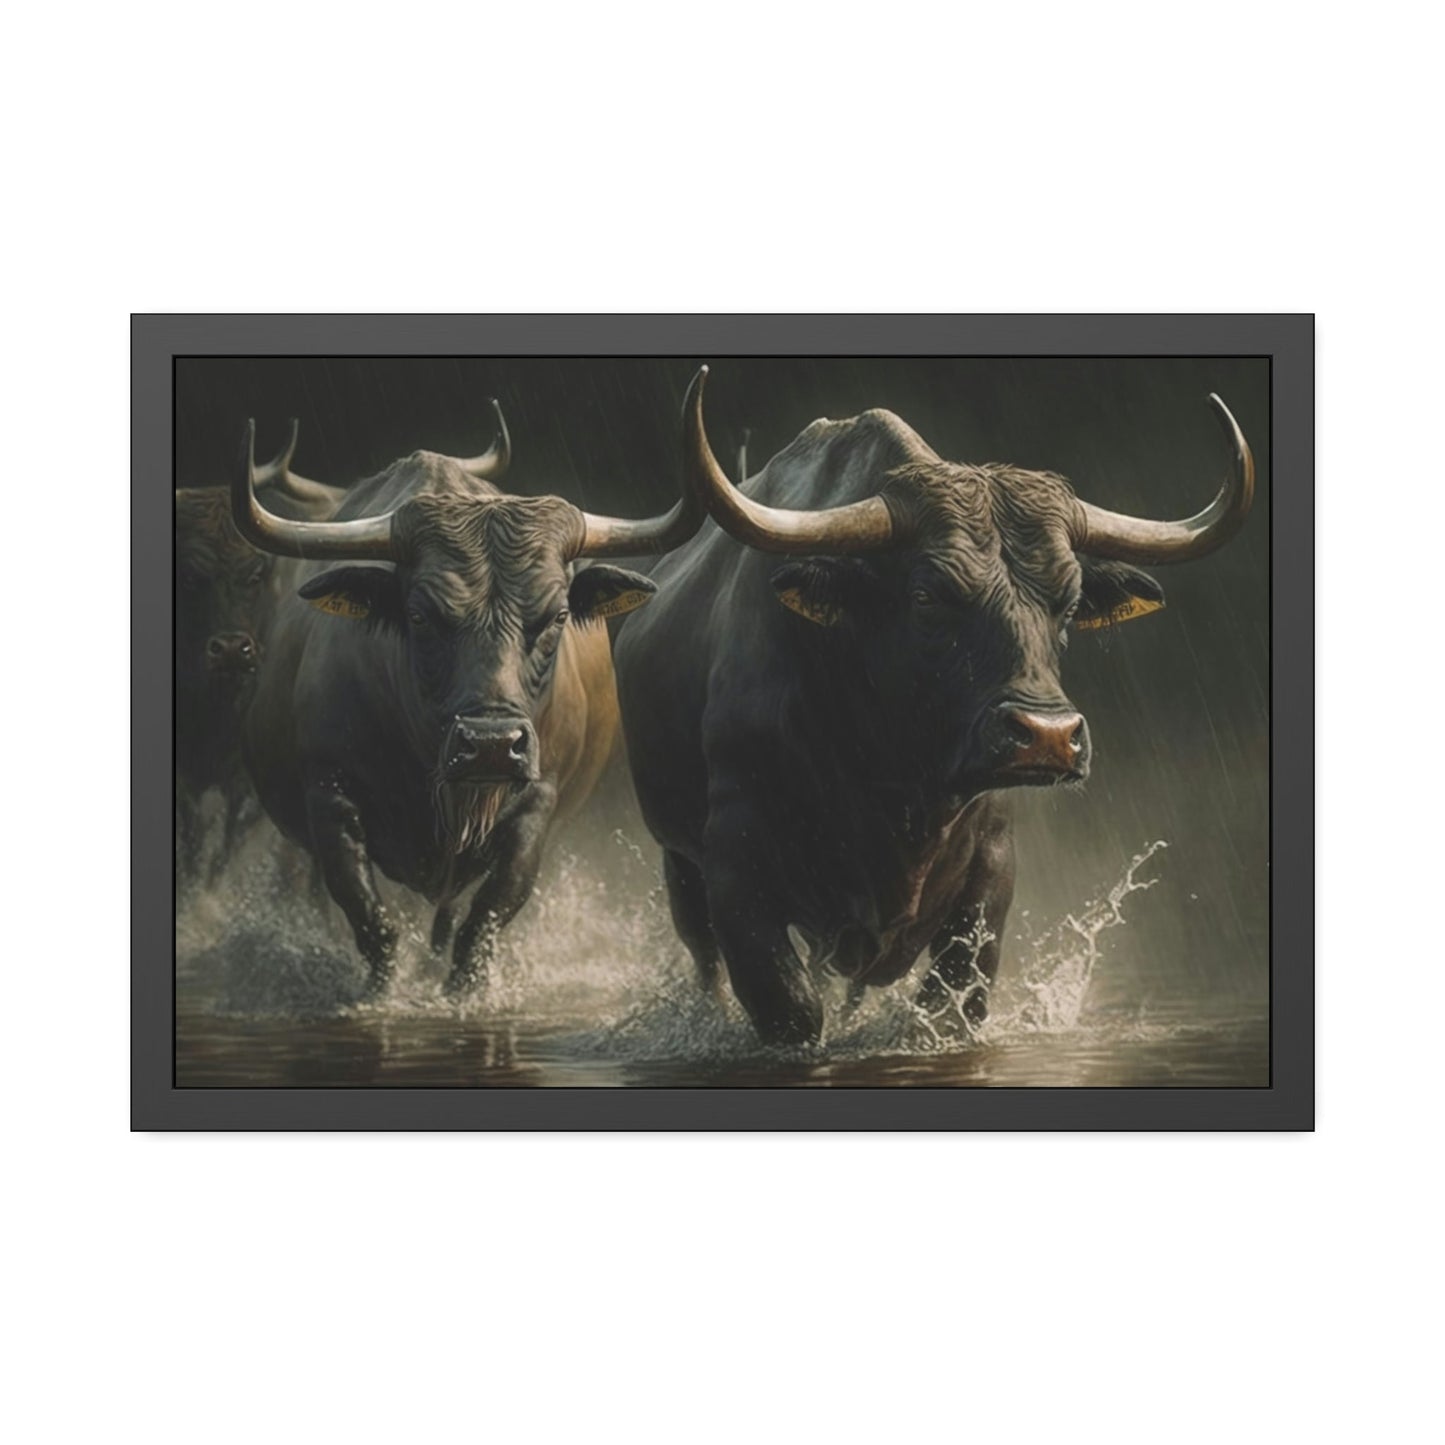 Wild Bulls Running: Poster & Canvas Print of Cattle Stampede